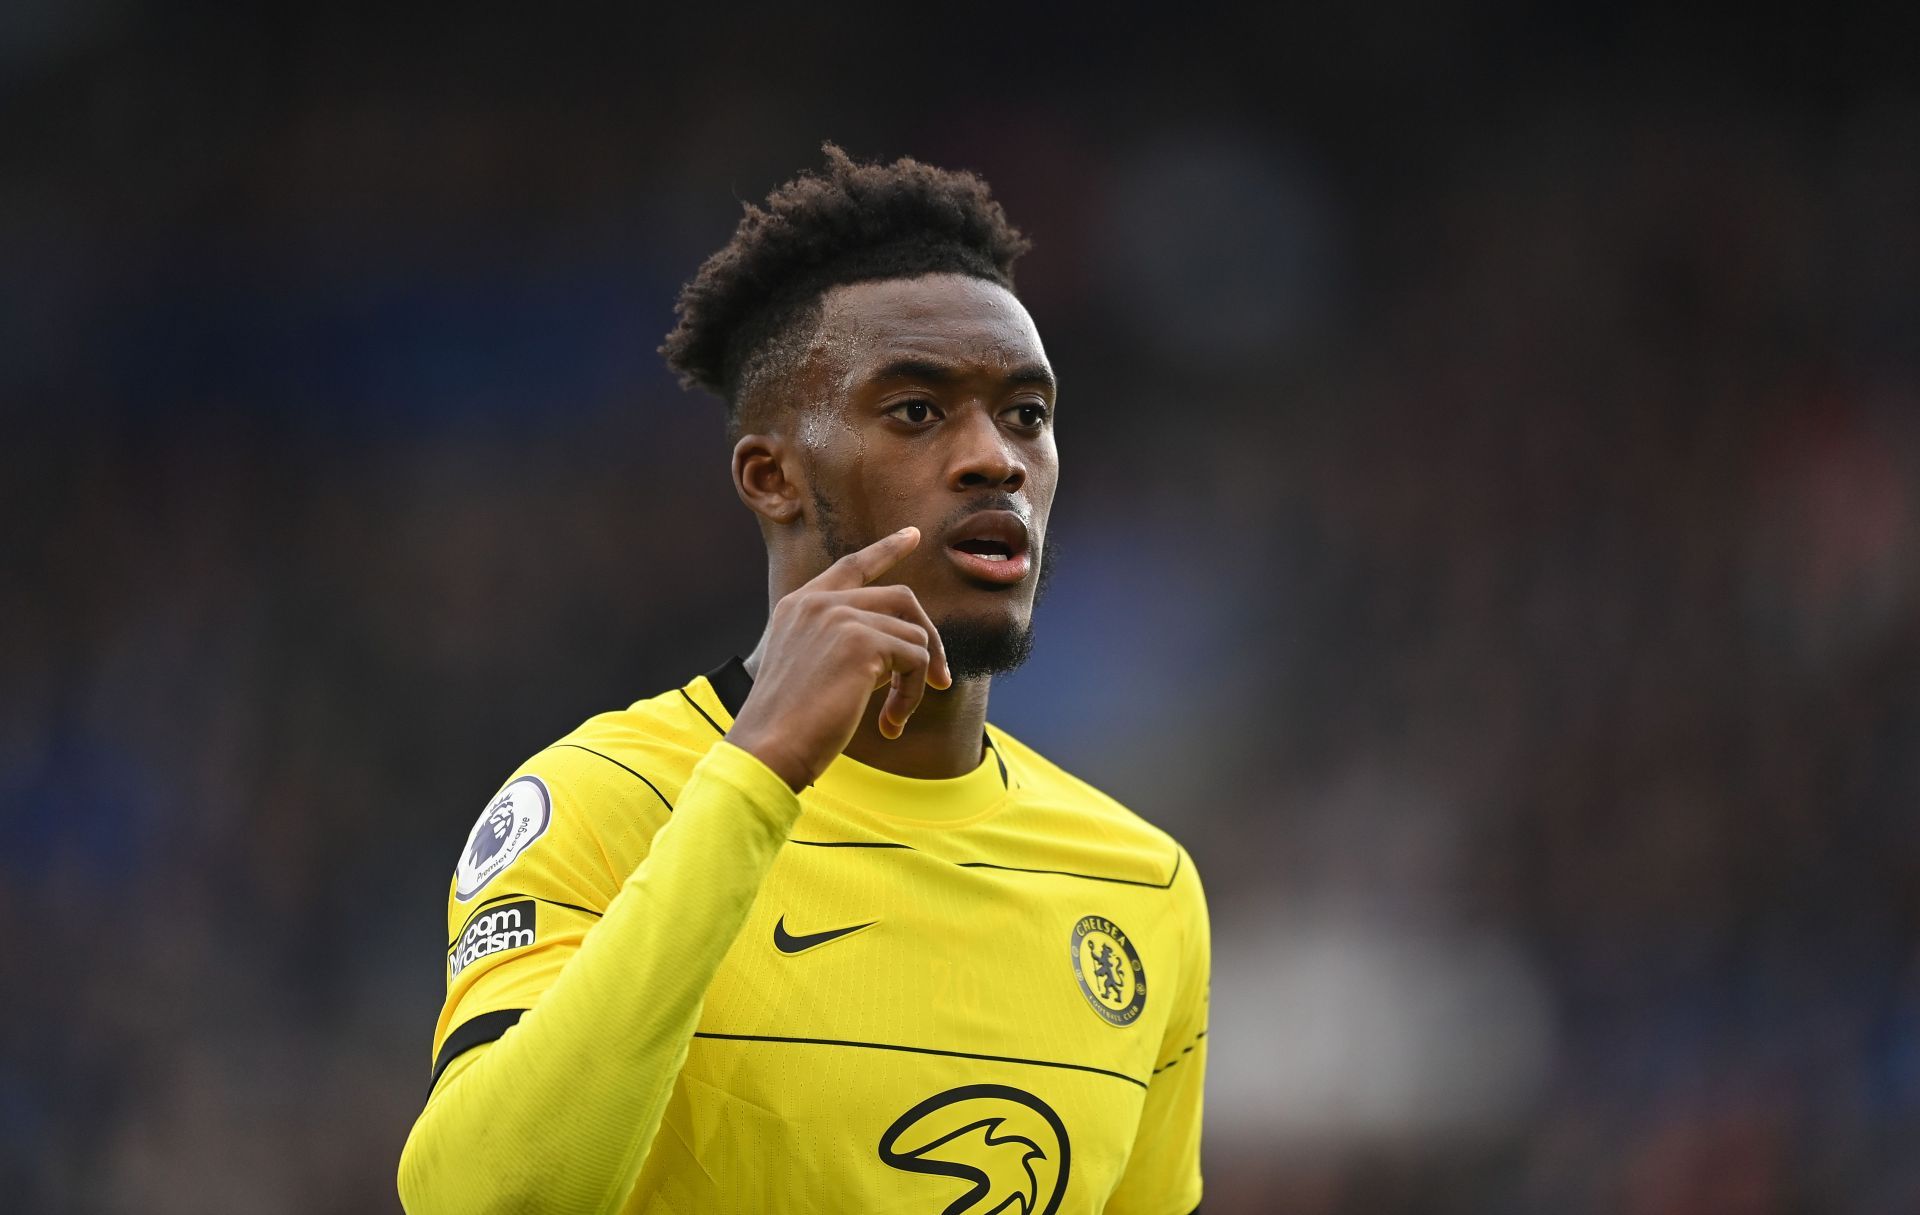 Hudson-Odoi is one of the top talents in England